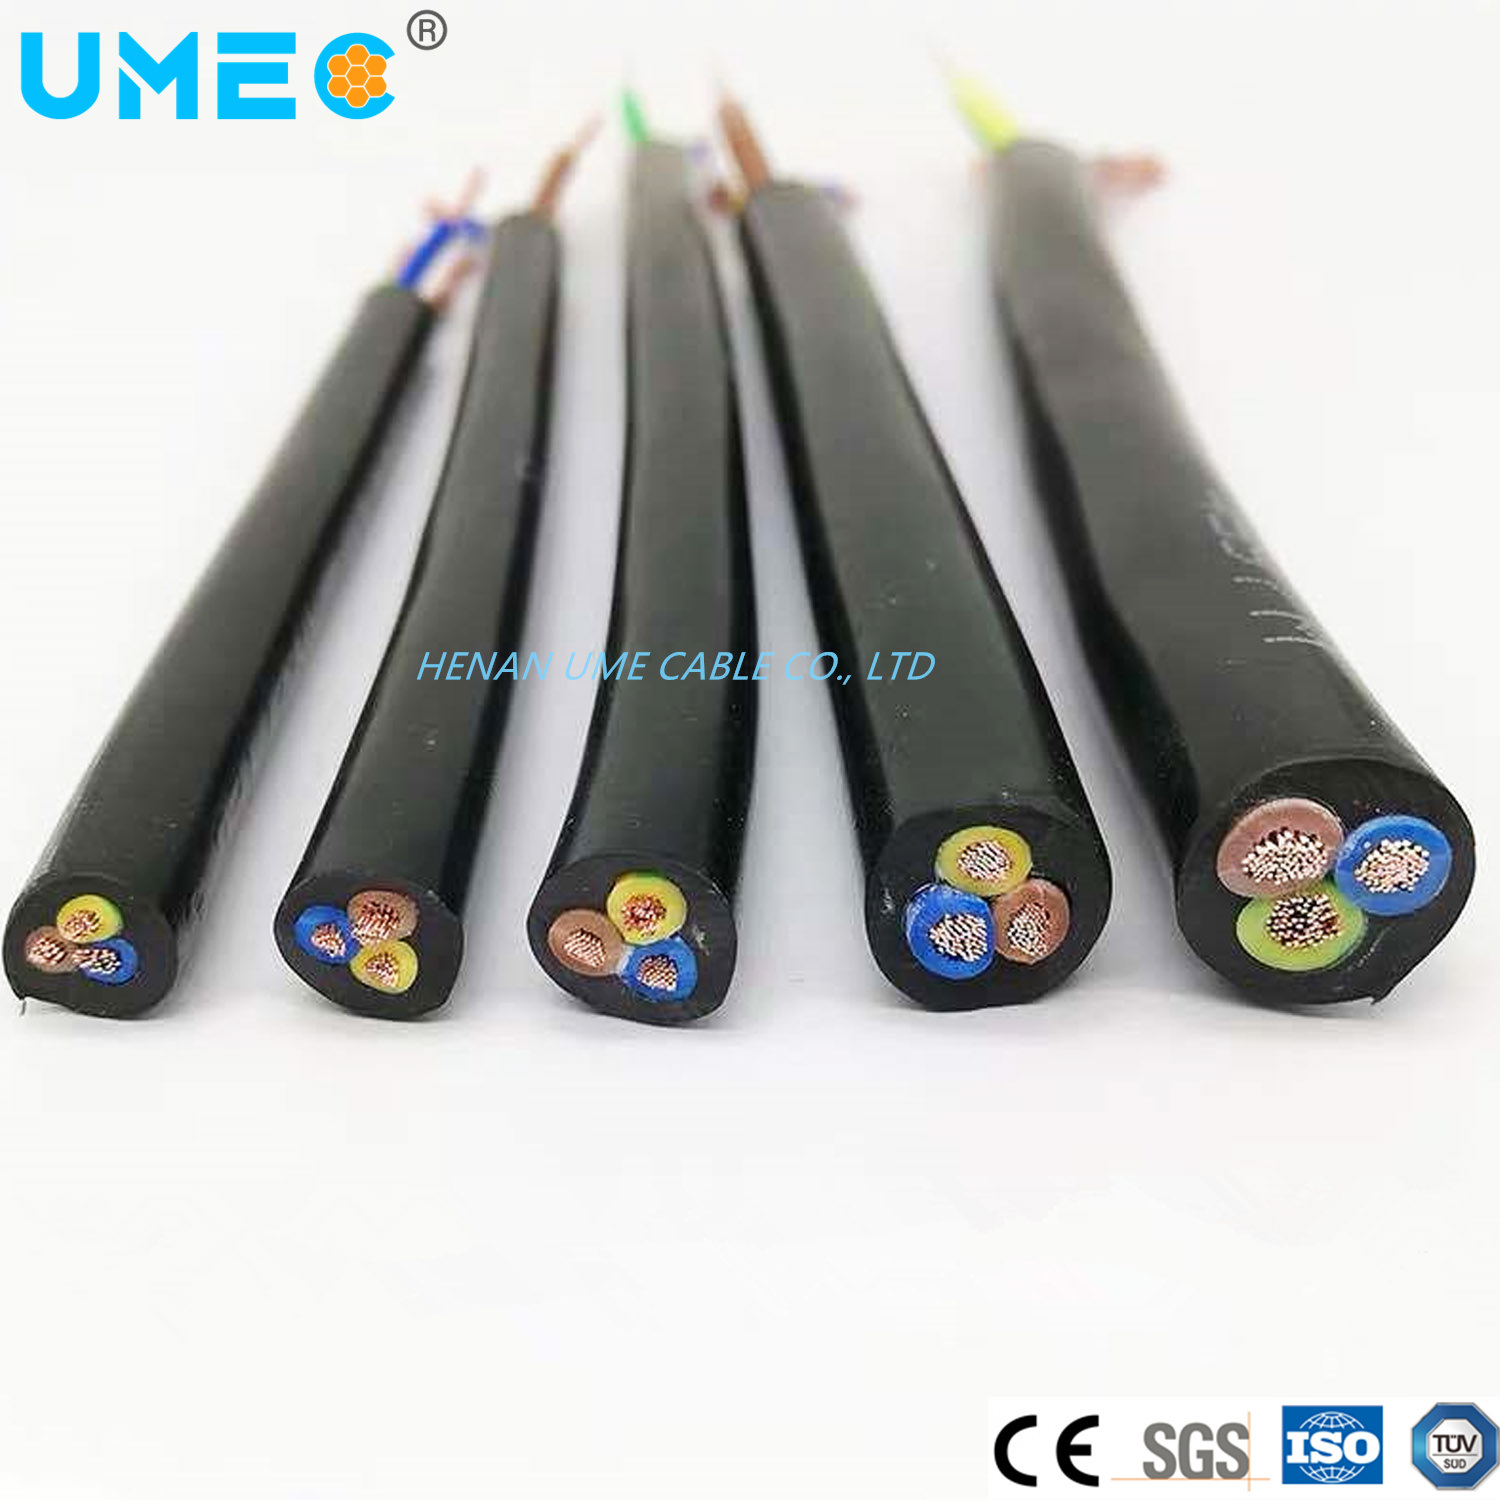 Electric Underground Cable Rvv Wire Myym Wire H05VV-F 2X1.0mm2/ 2X2.5mm2/ 3*0.75mm2/ 3X 2.5mm2 Flexible Low Electric Loss Cable